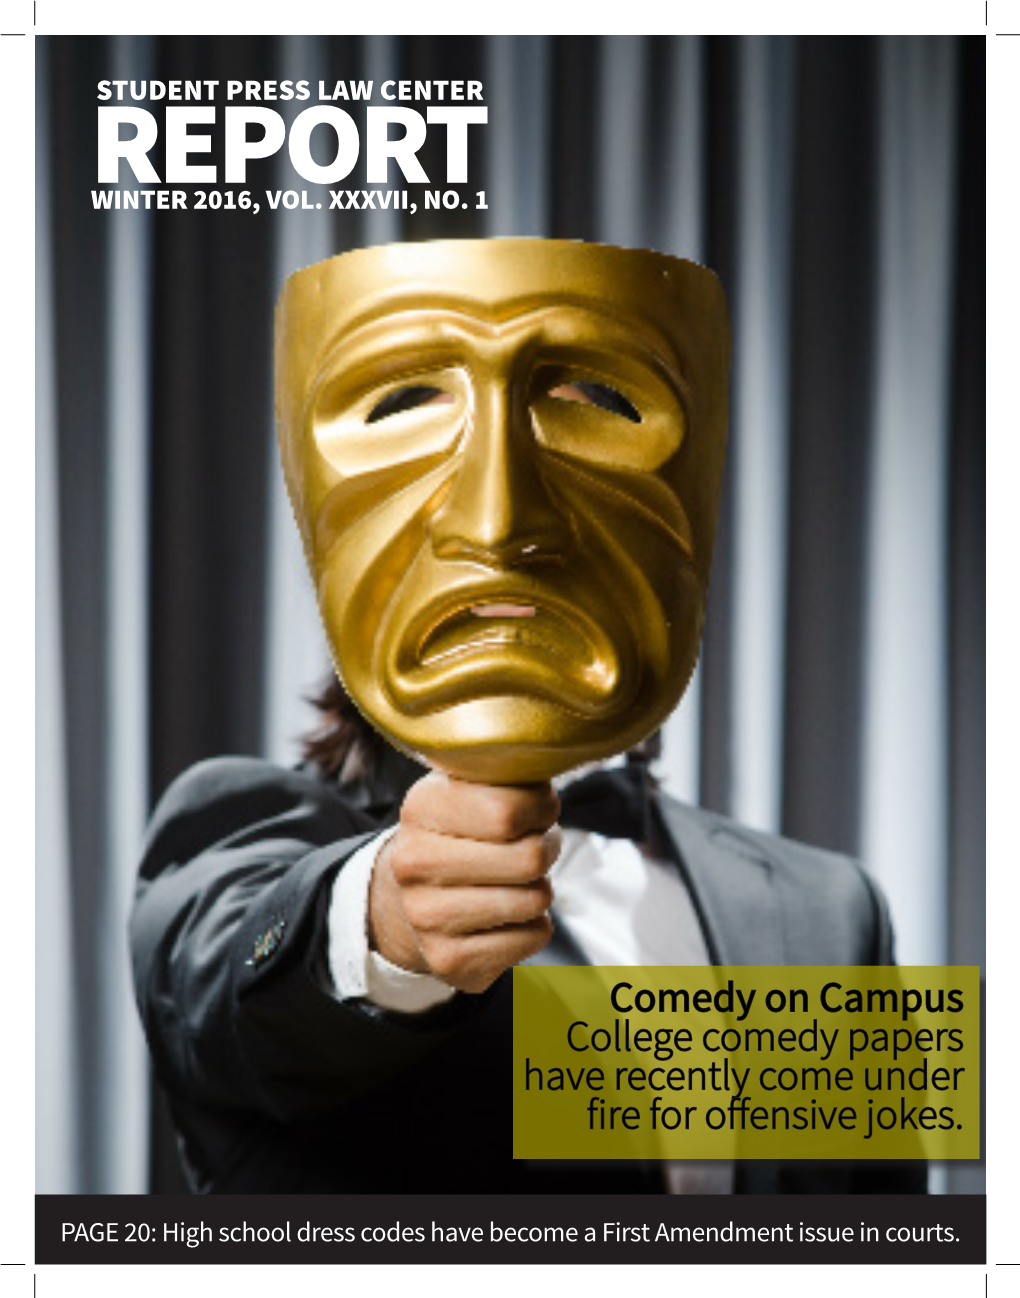 Comedy on Campus College Comedy Papers Have Recently Come Under Fire for Offensive Jokes